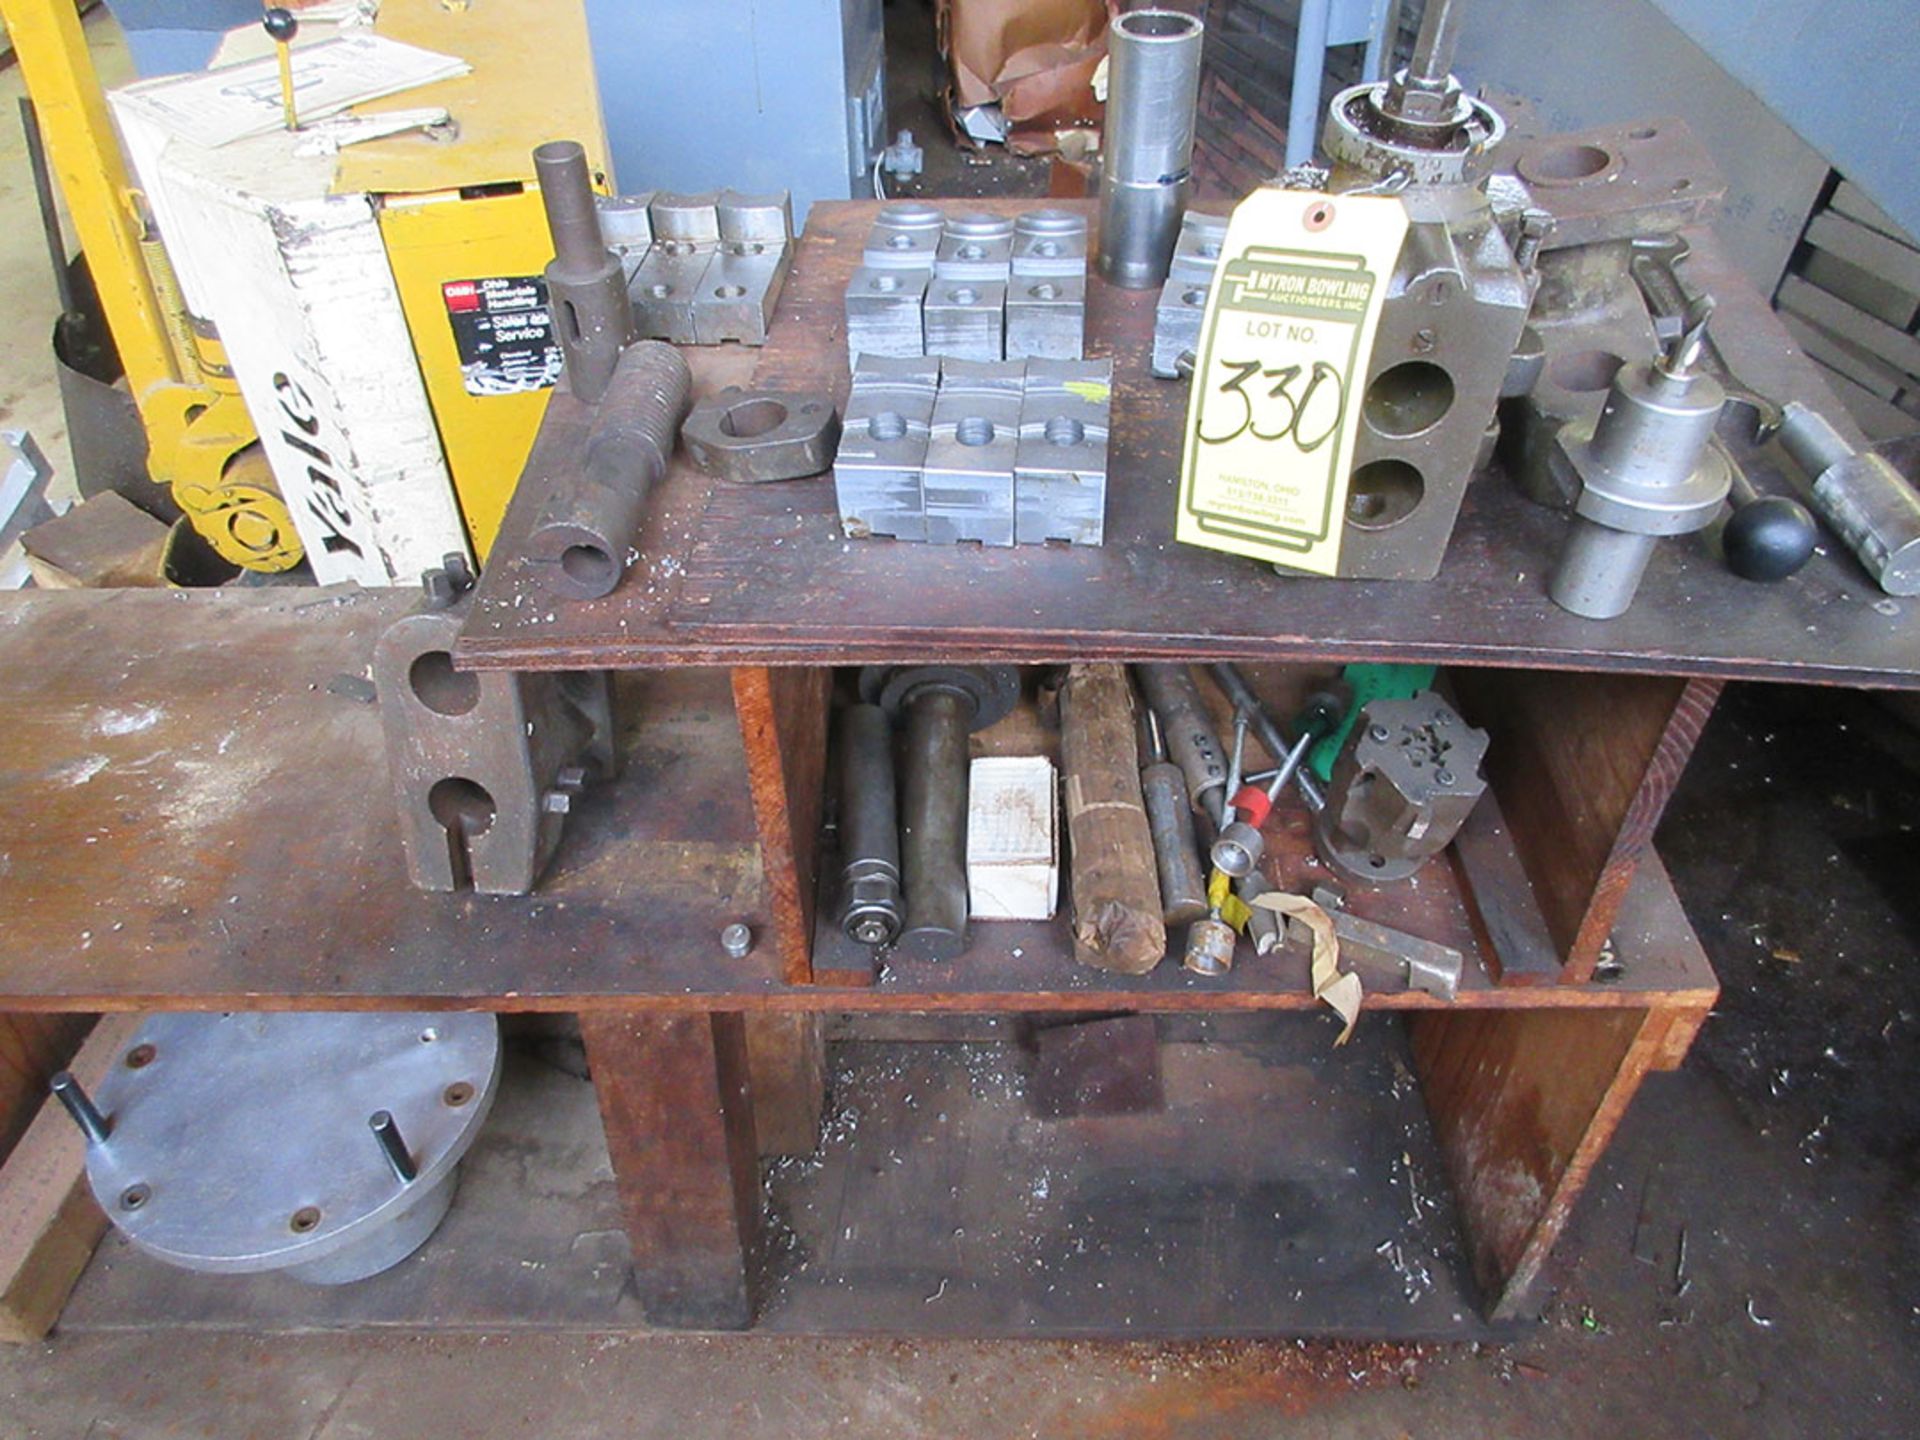 TABLE WITH CONTENTS; LATHE TOOLING, CHUCK JAWS